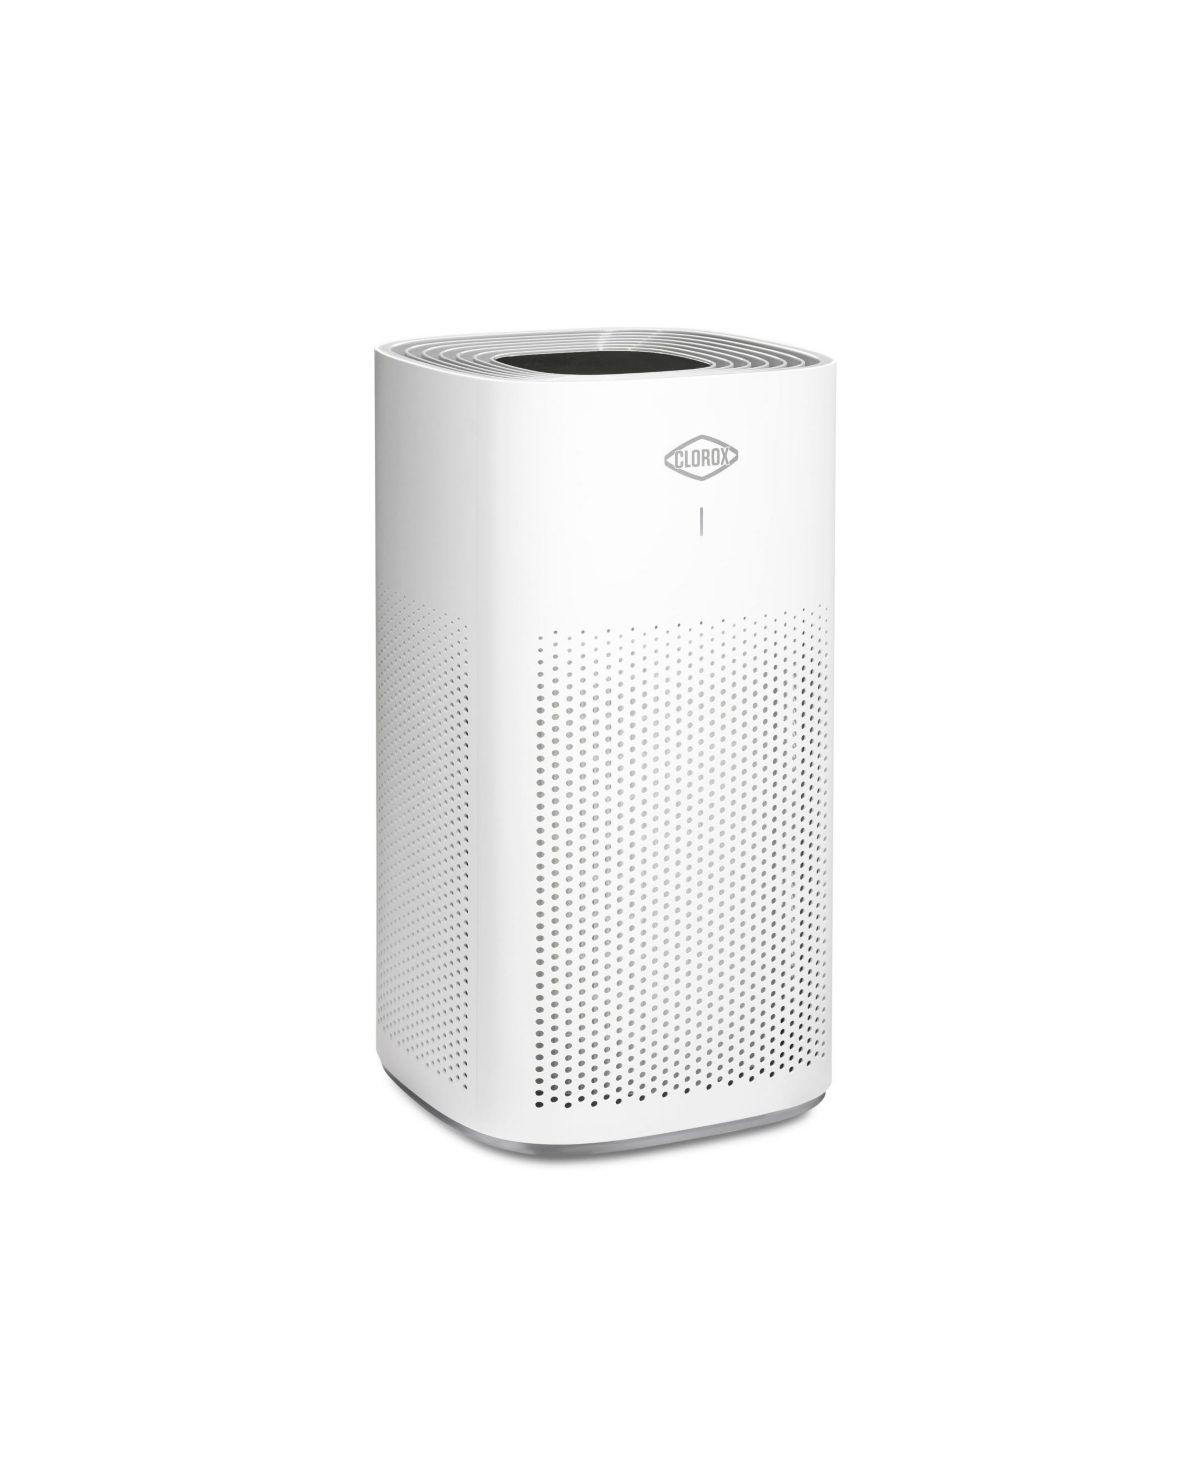 Chi Clorox Large Room Smart True High Efficiency Particulate Air (hepa) Air Purifier In White